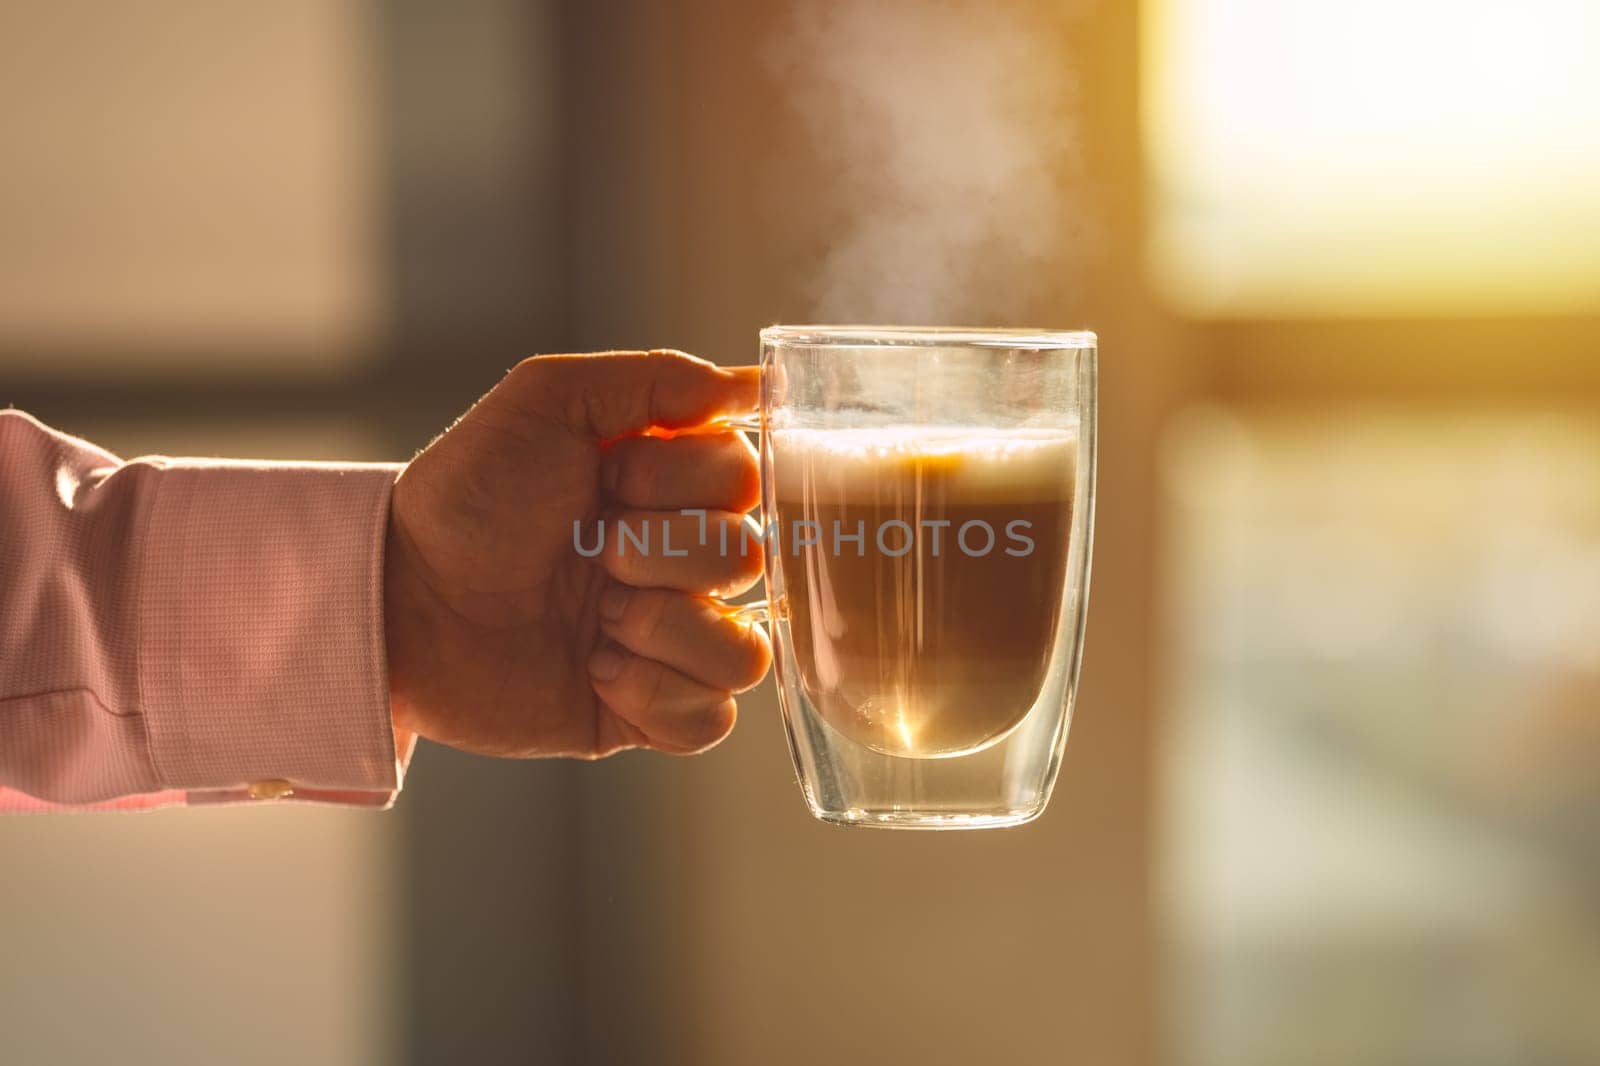 A cozy photo of a hand holding a steaming cup of coffee. The photo invokes warm feelings associated with sipping hot drinks before working day. by DariaKulkova